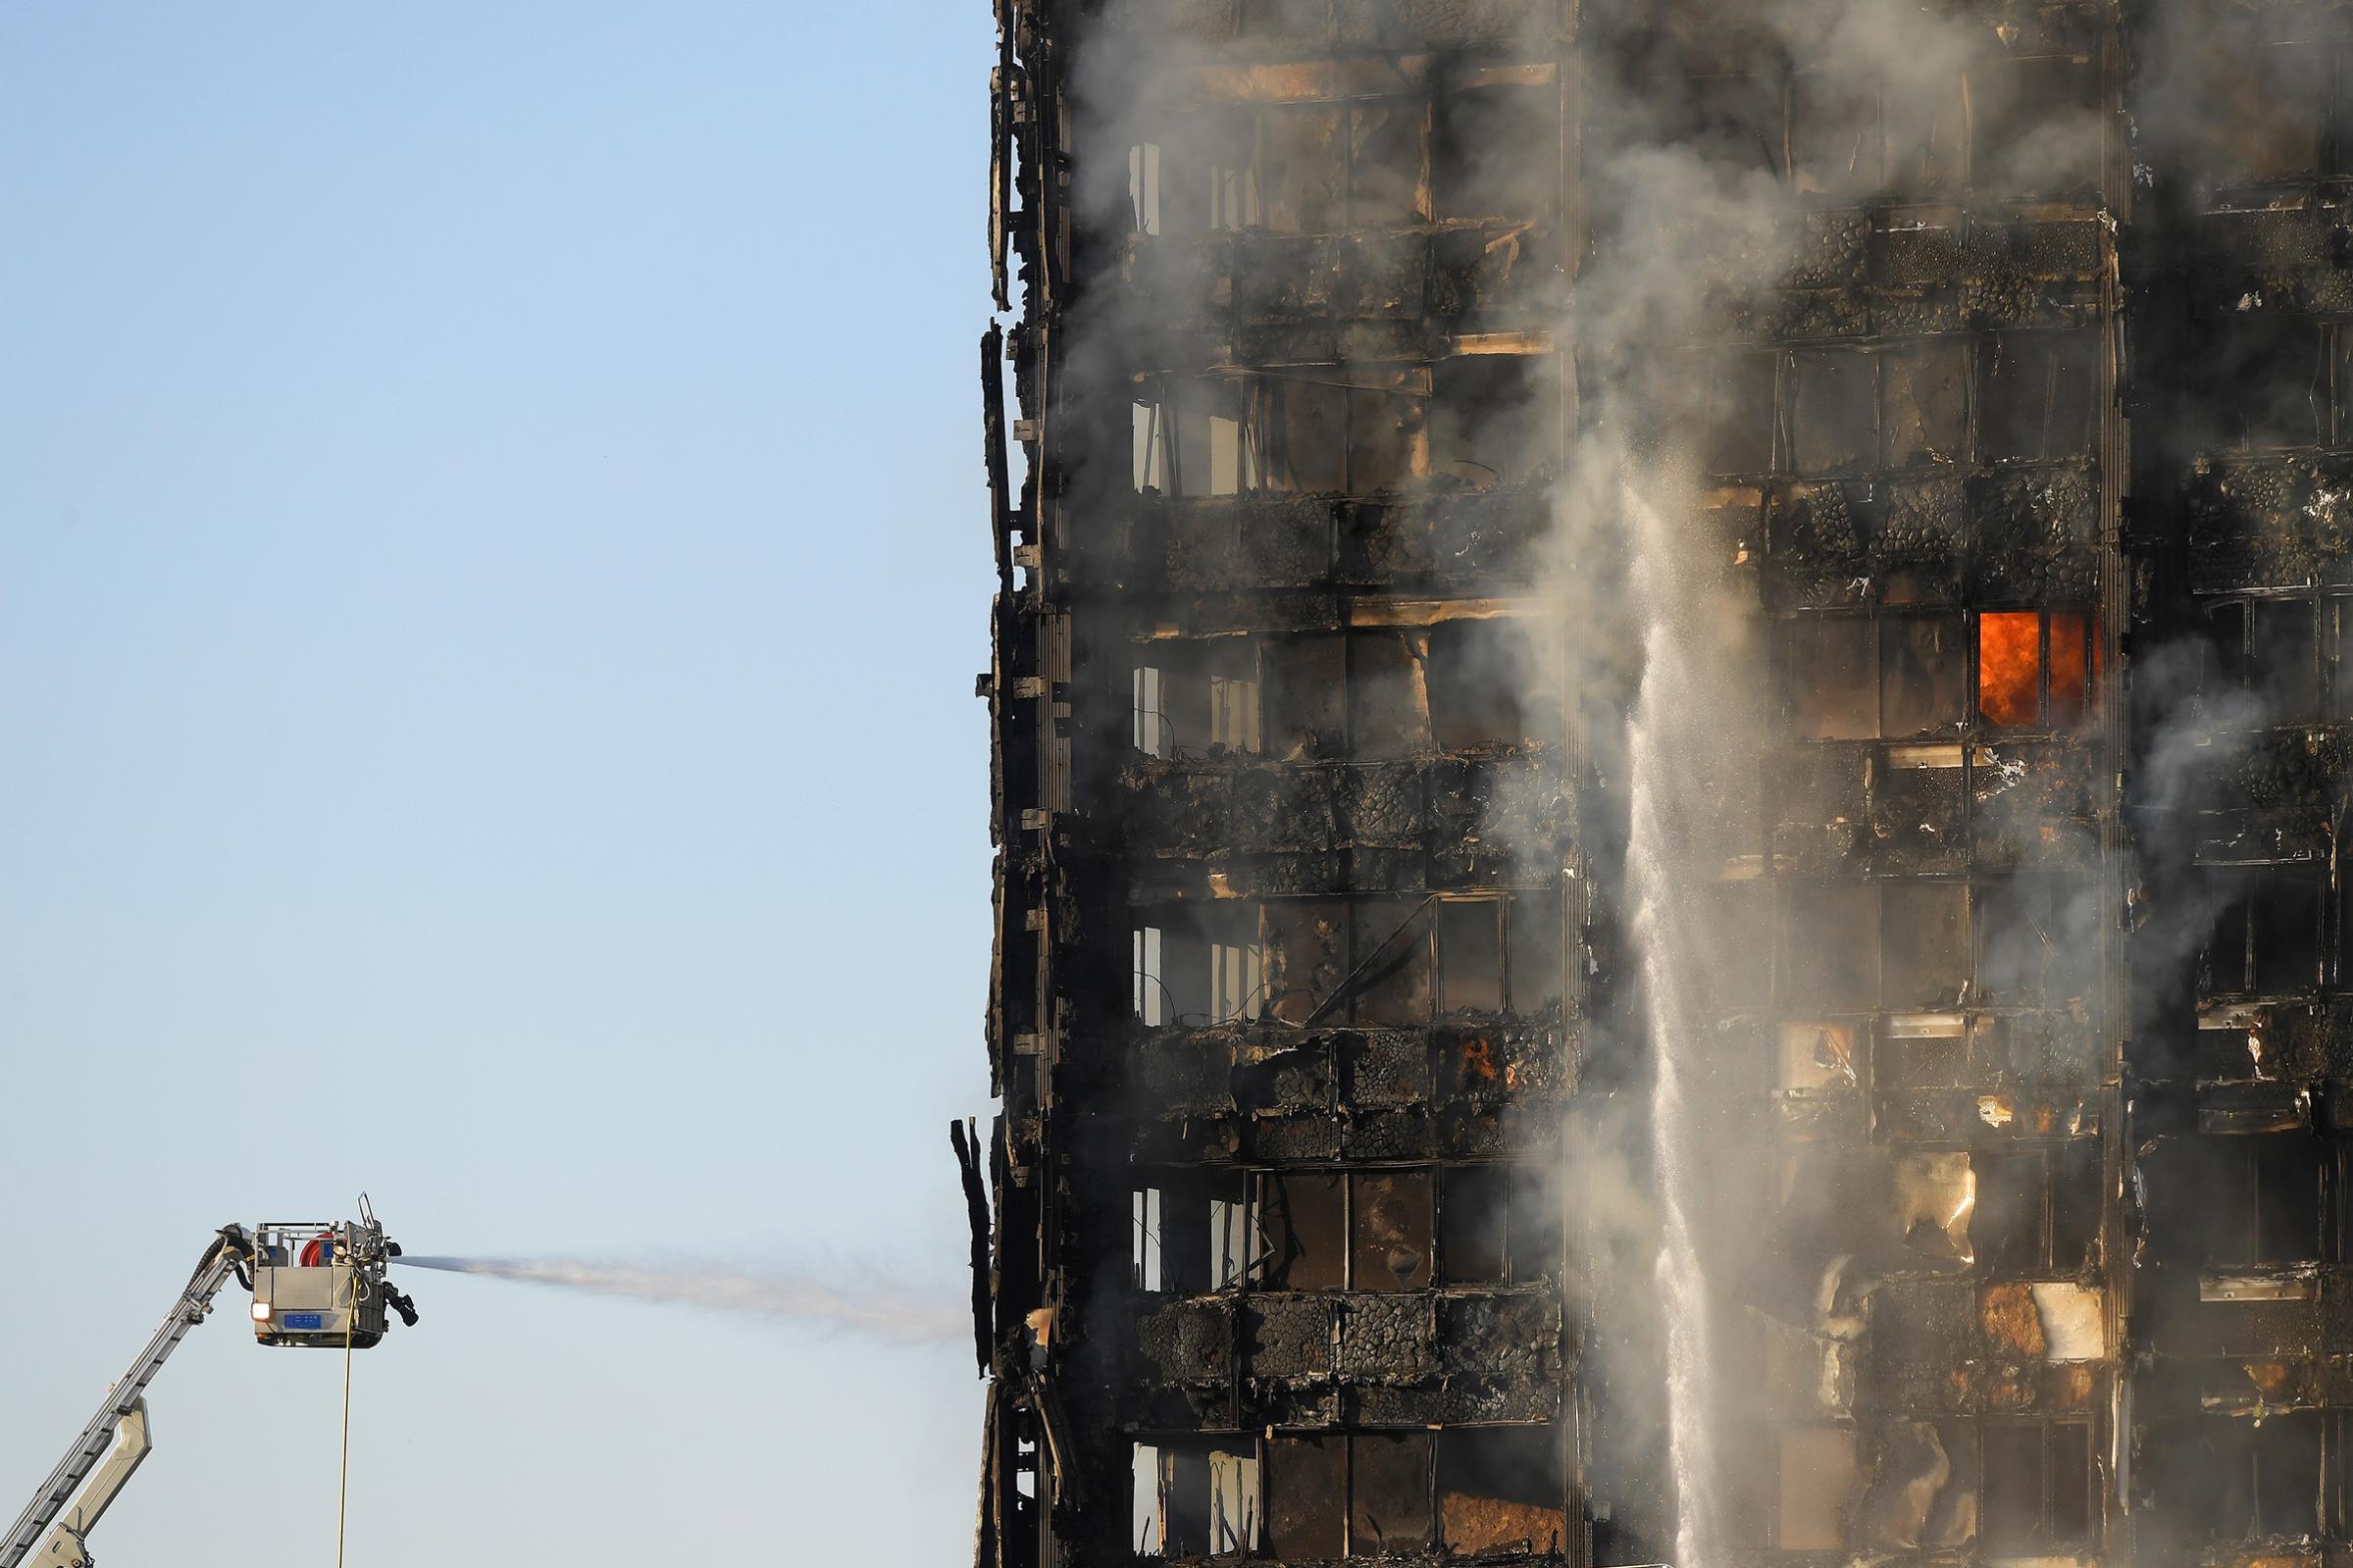 Firefighters spray water into the smoldering frame of a high-rise that caught fire overnight in West London on June 14, 2017.